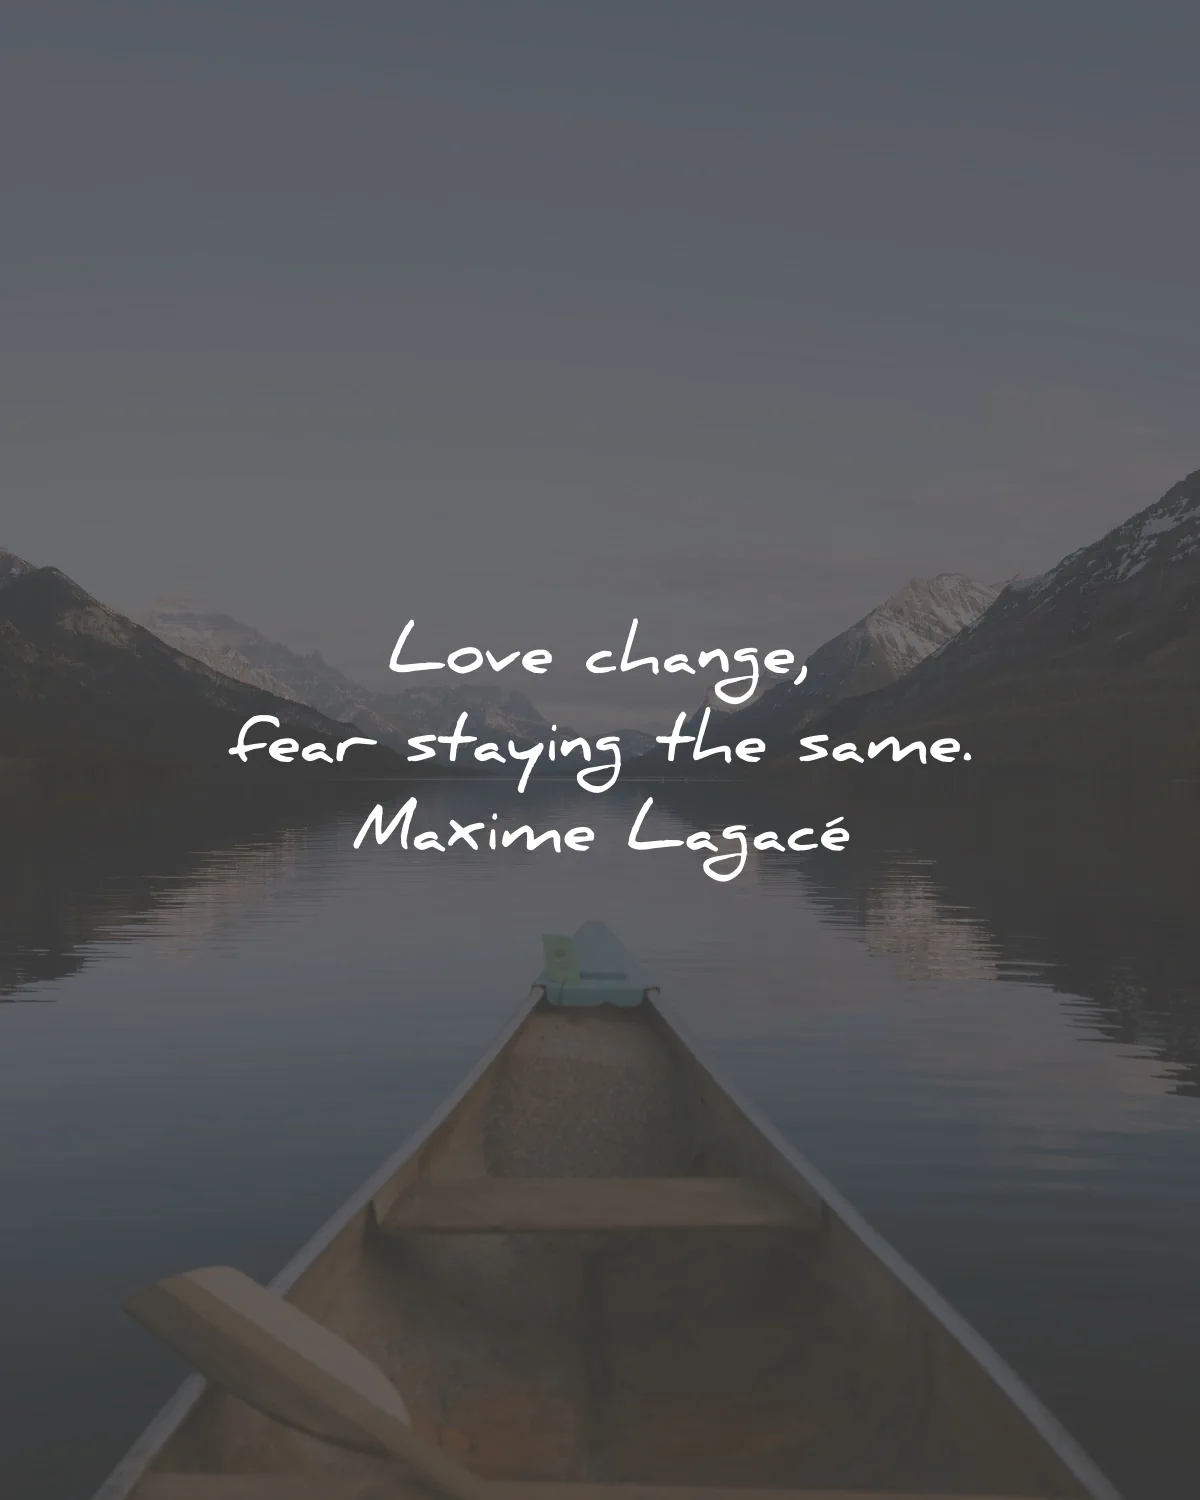 quotes about change growth love fear staying maxime lagace wisdom